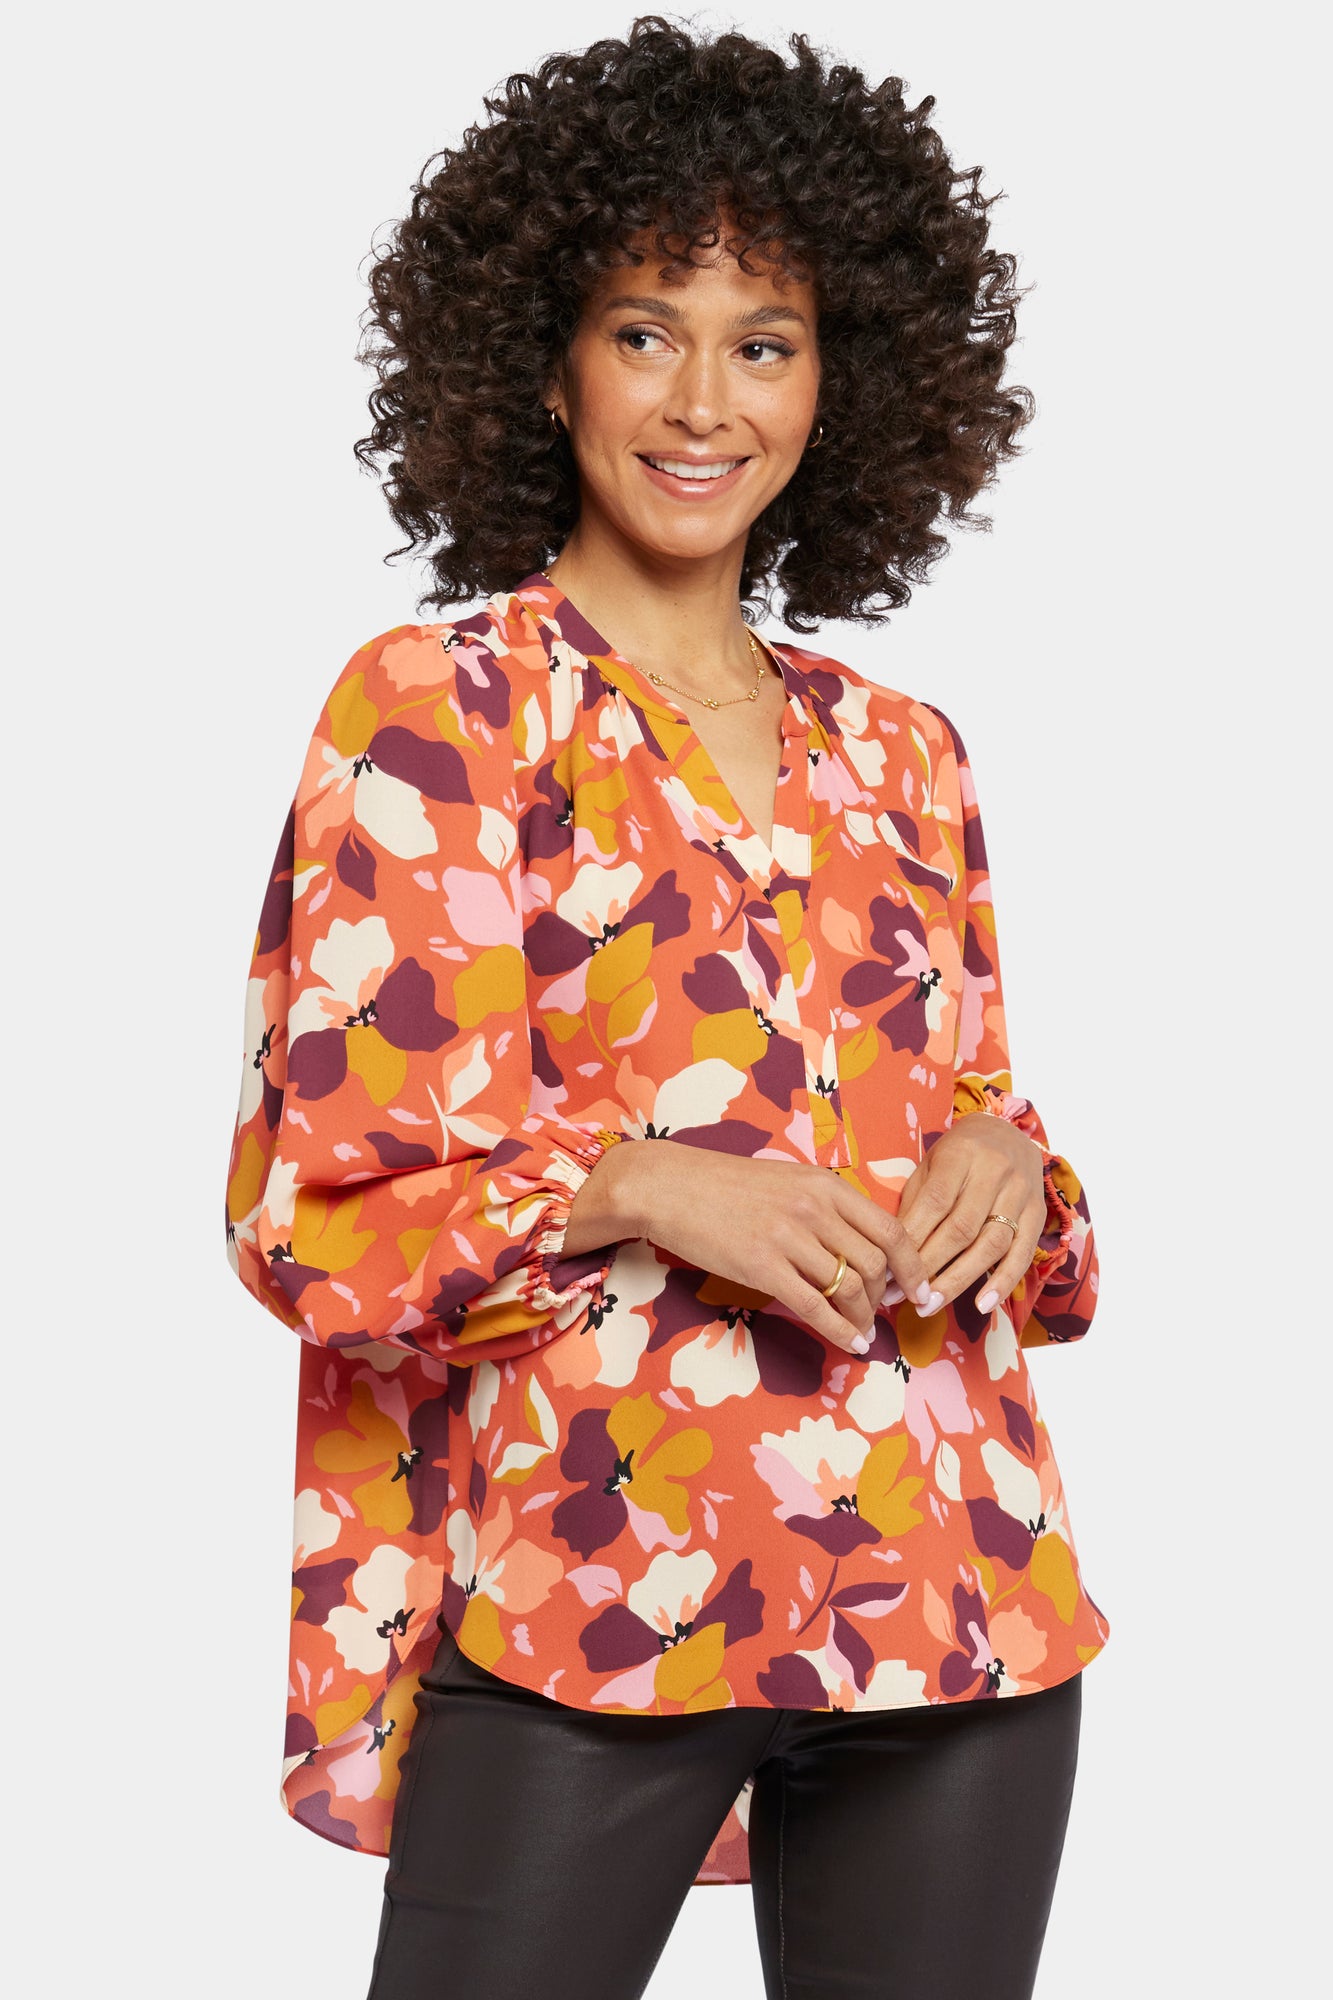 NYDJ Puff Sleeve Popover Top  - Gingervale